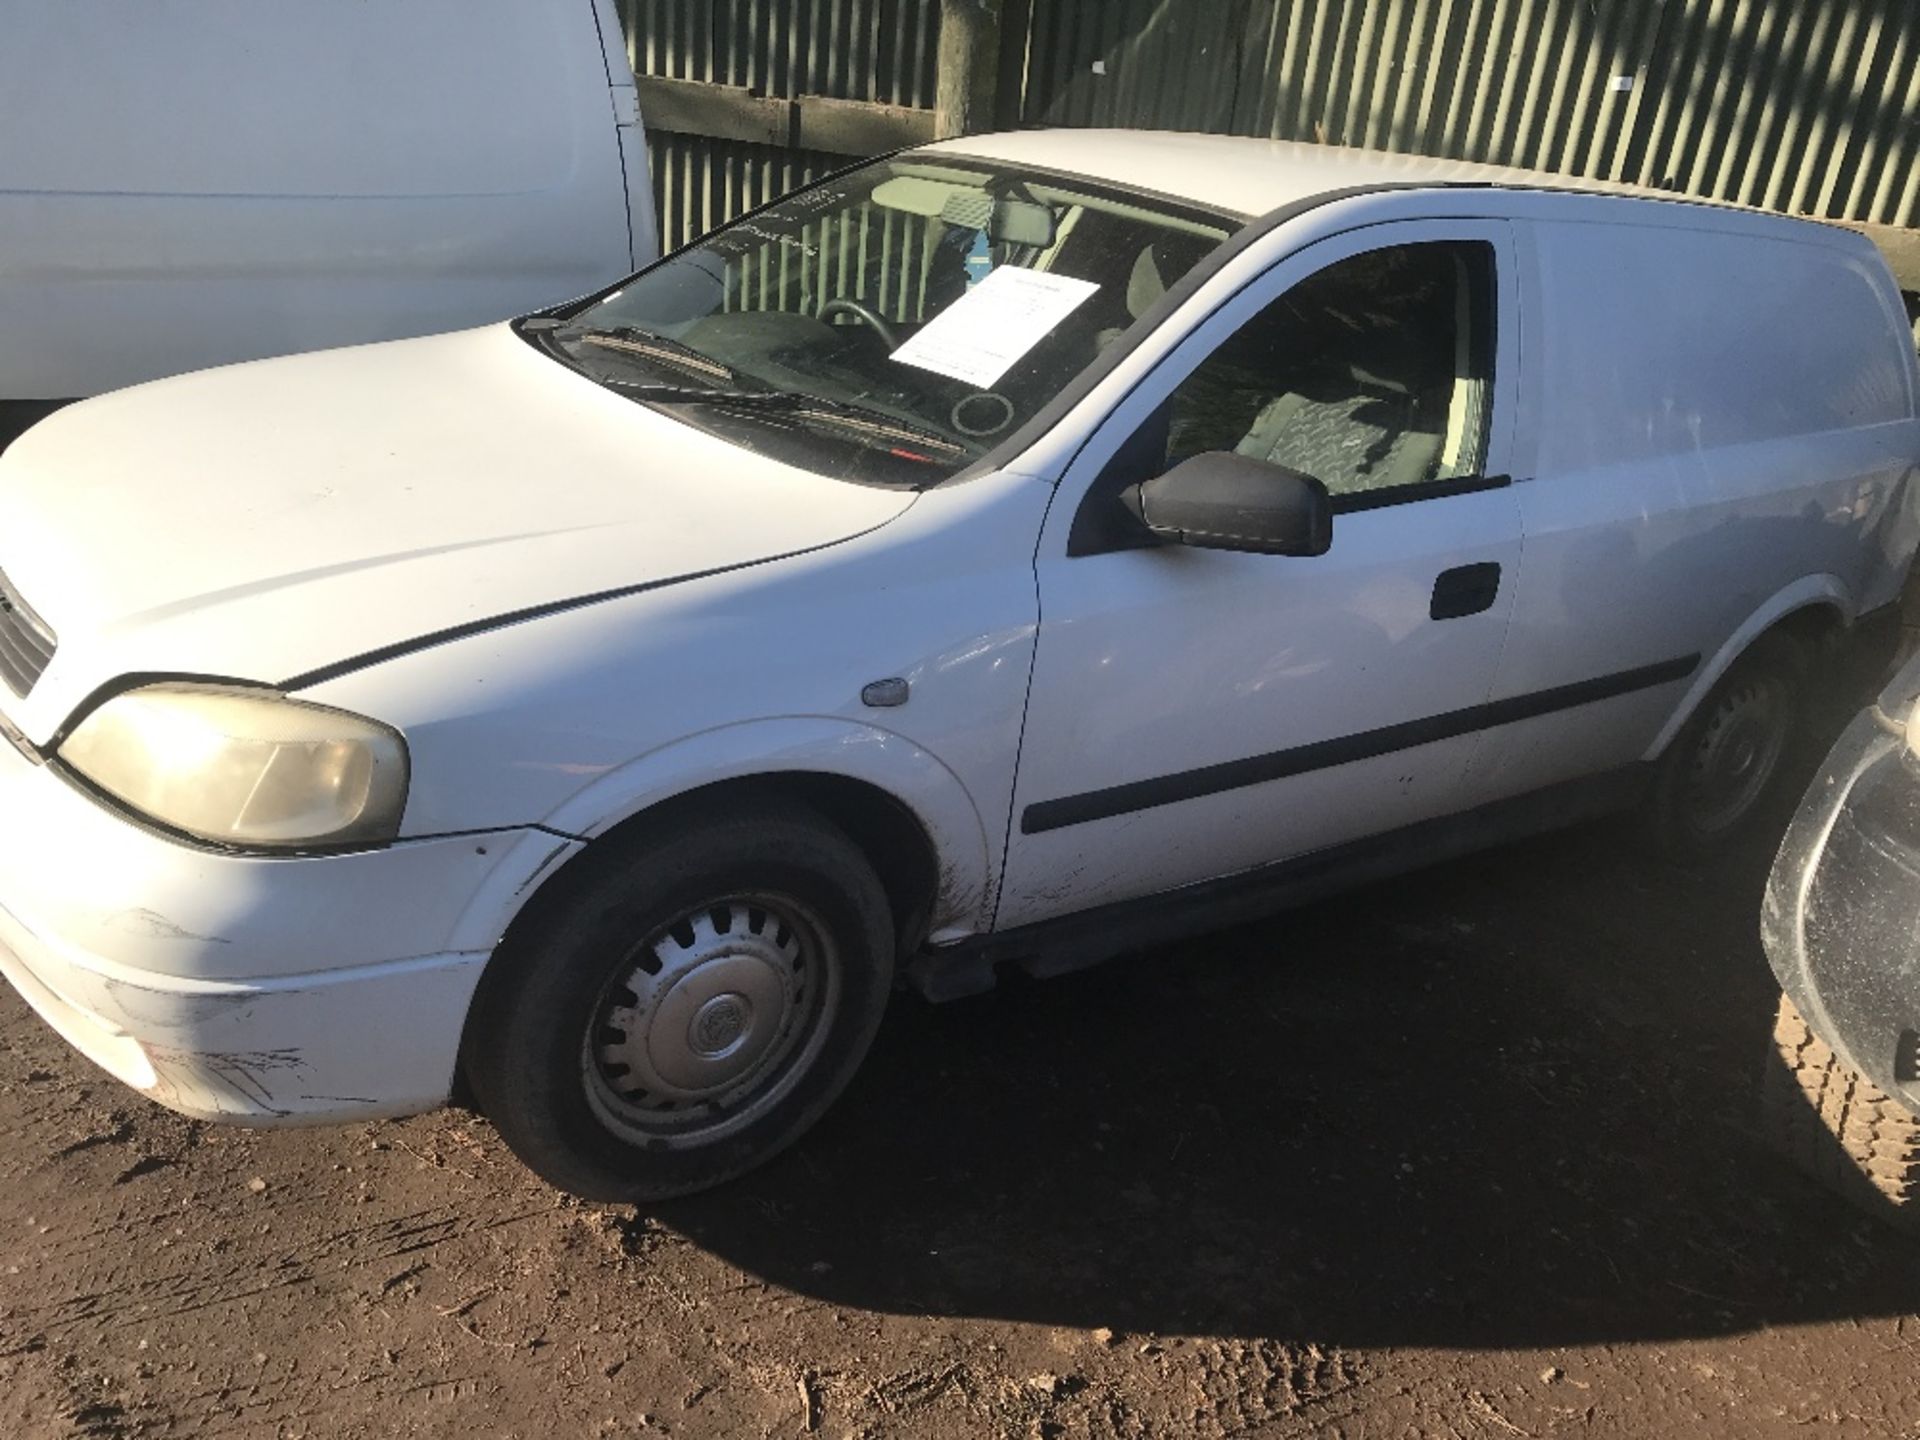 ASTRA PANEL VAN, WHITE REG:YJ02 BKT, WITH V5, TEST TO 25.9.19. DIRECT EX LOCAL COMPANY, PREVIOUS